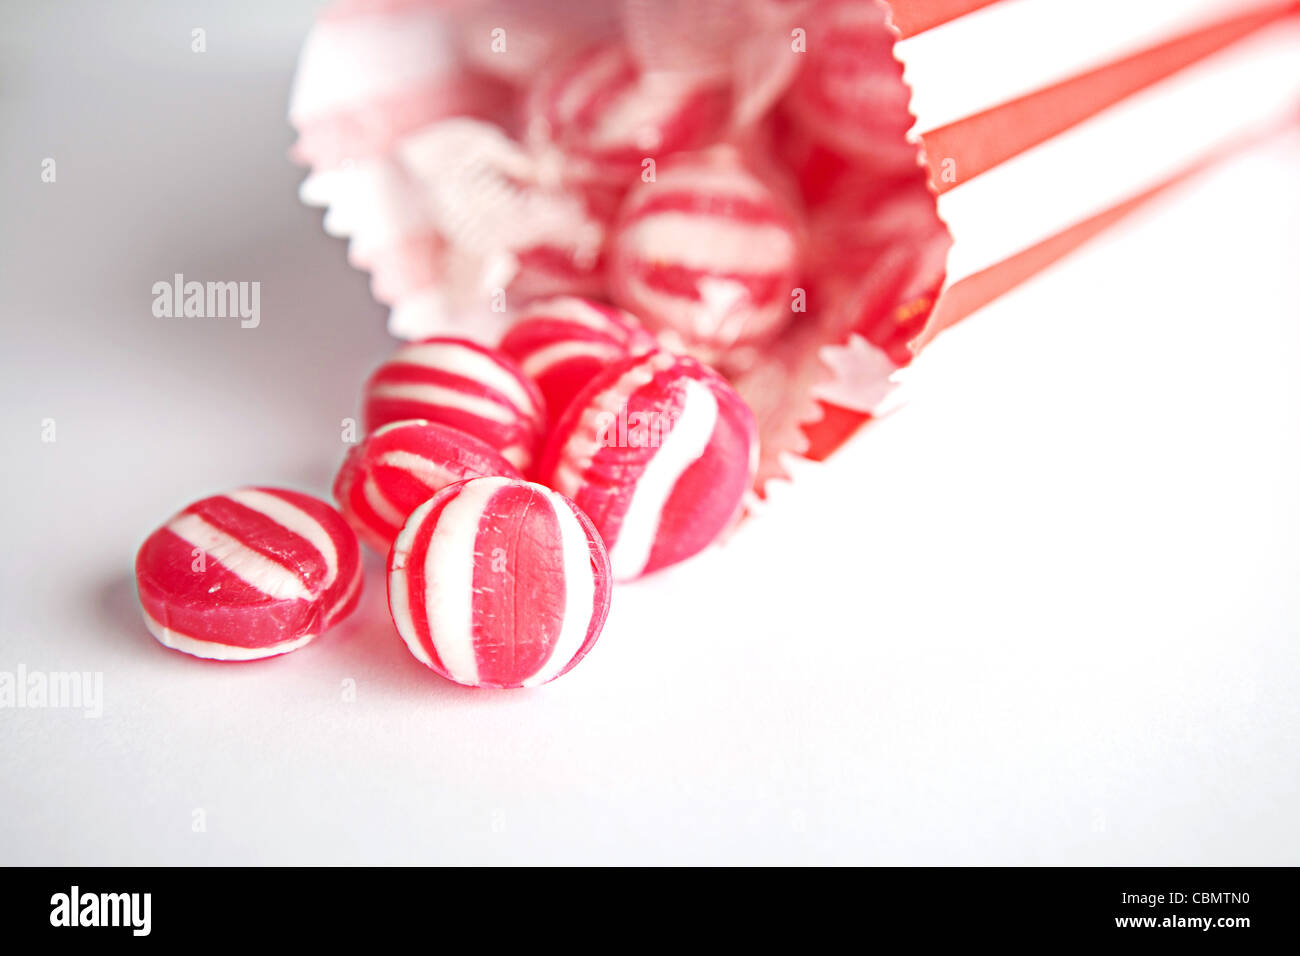 Red and white striped mint sweets spilling out of a paper bag Stock Photo